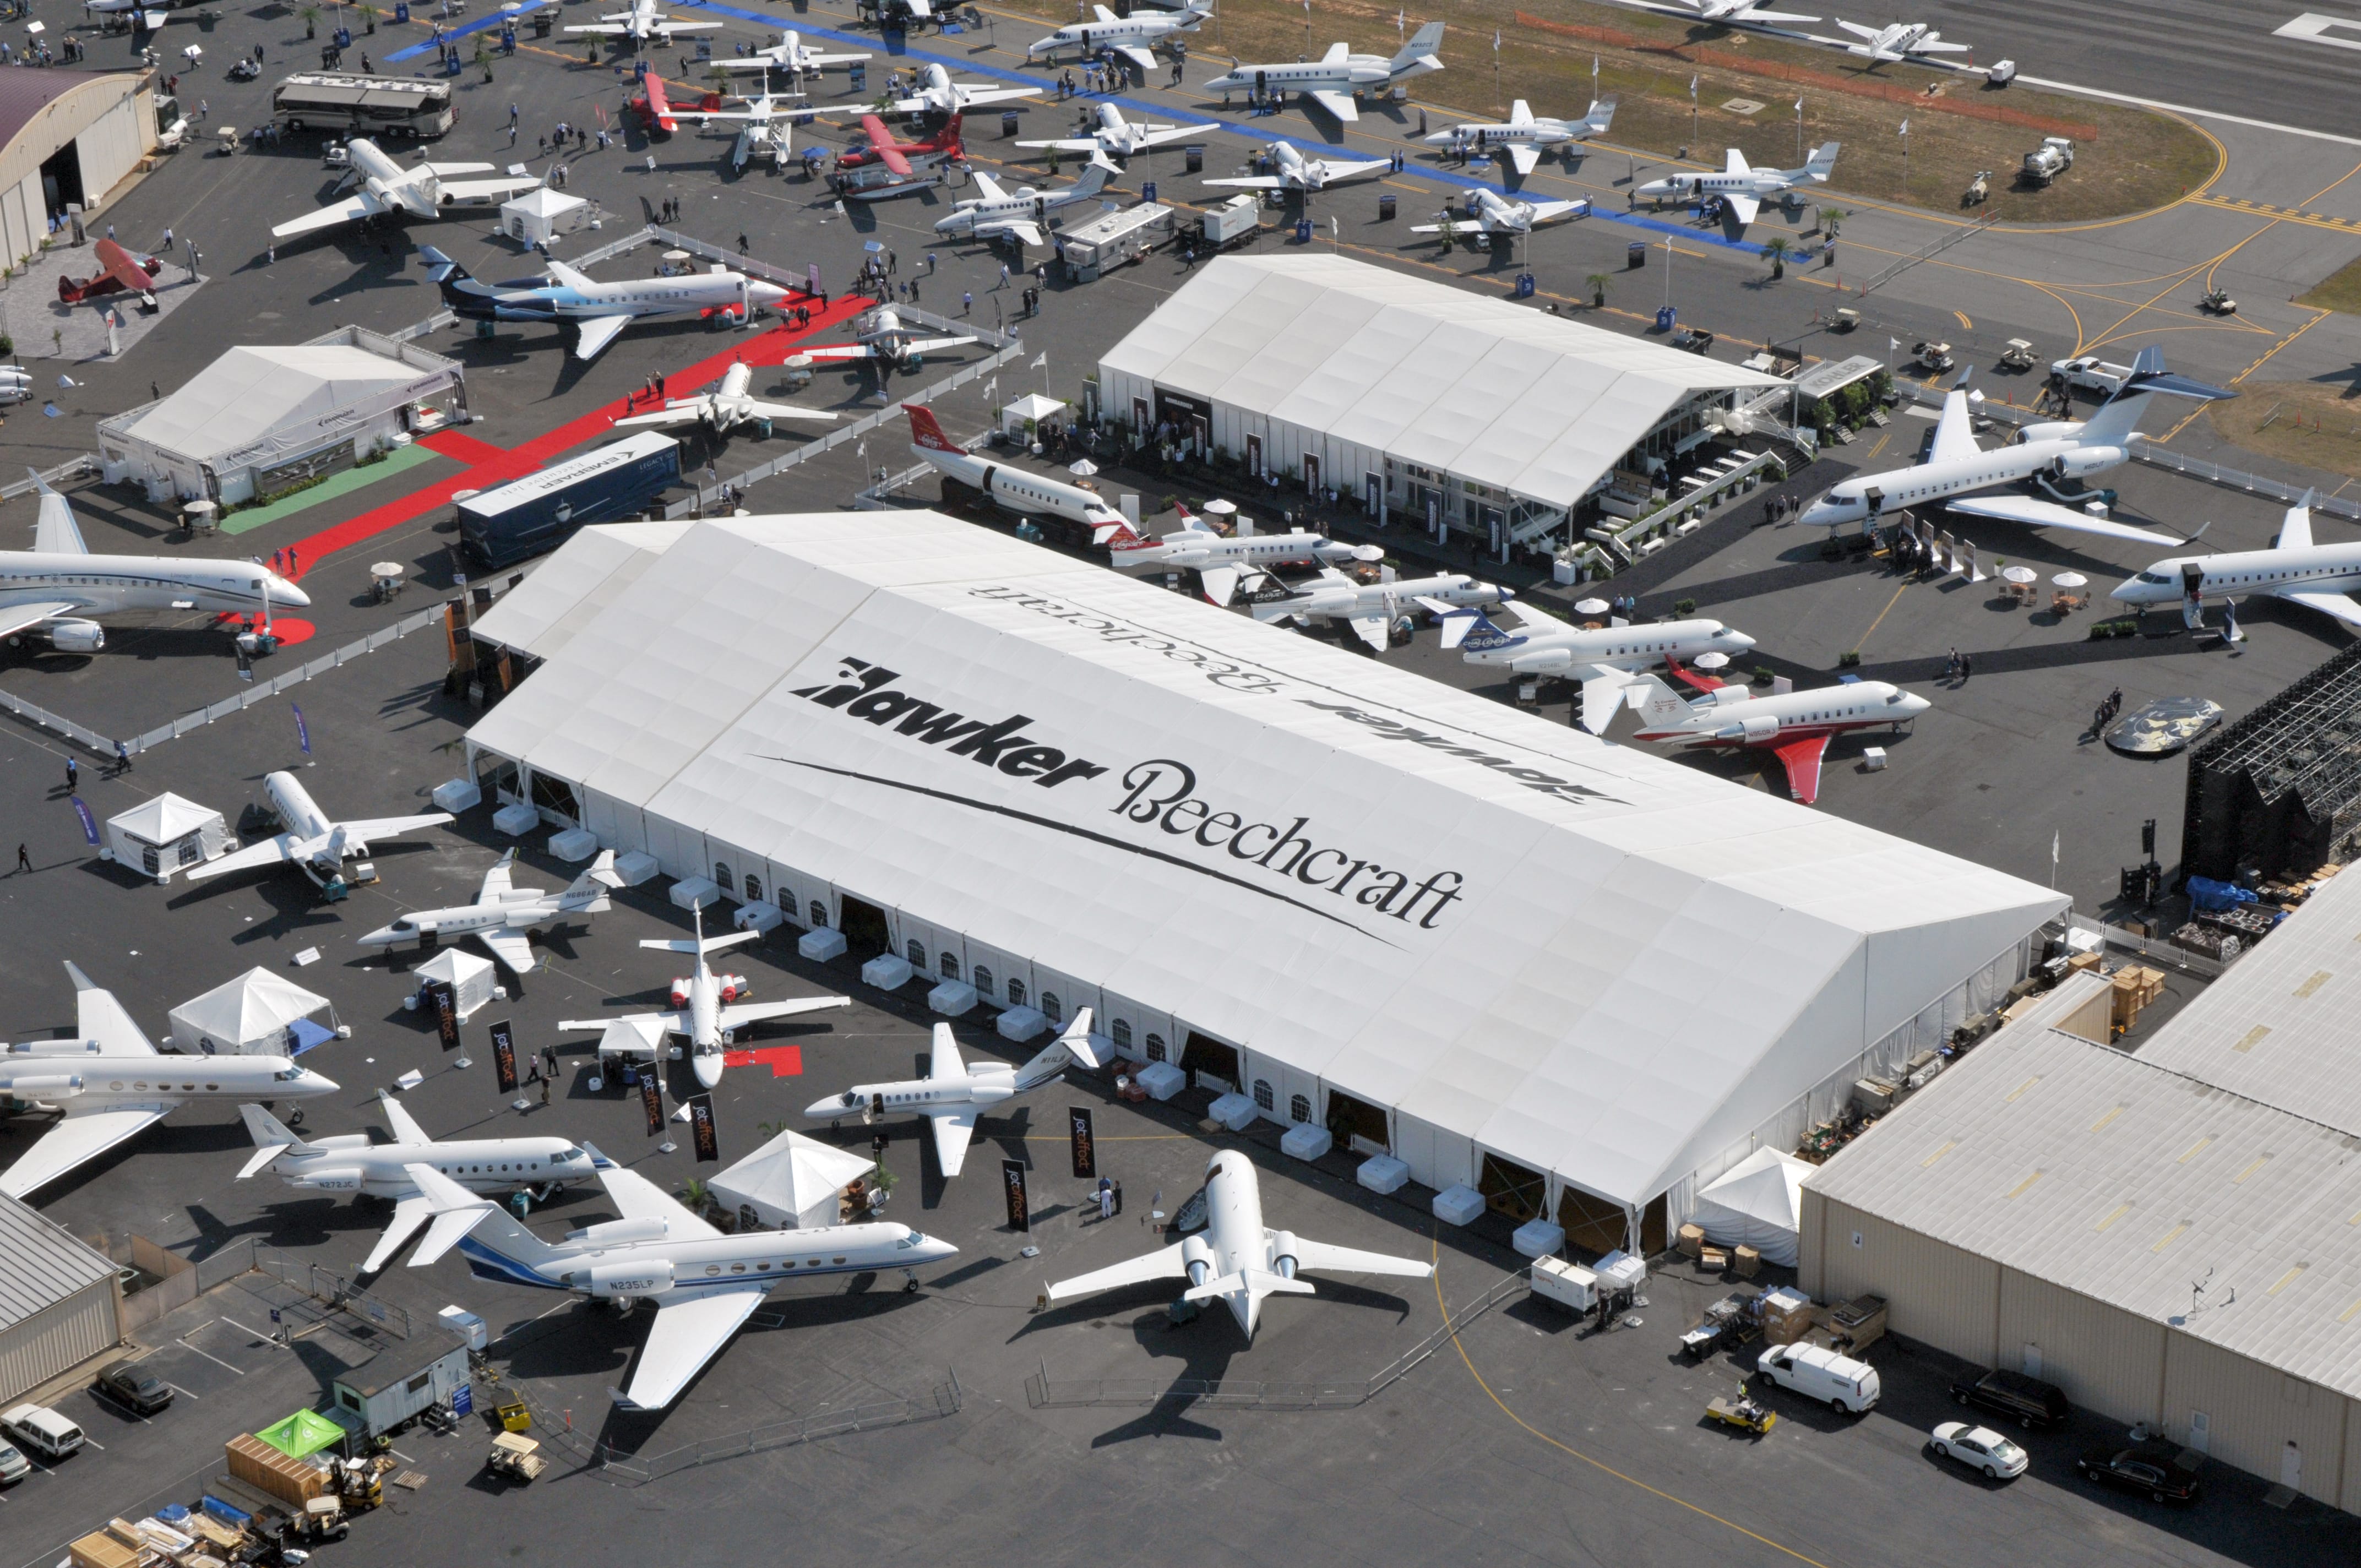 Corporate Trade Show Tent for Aircrafts | American Pavilion